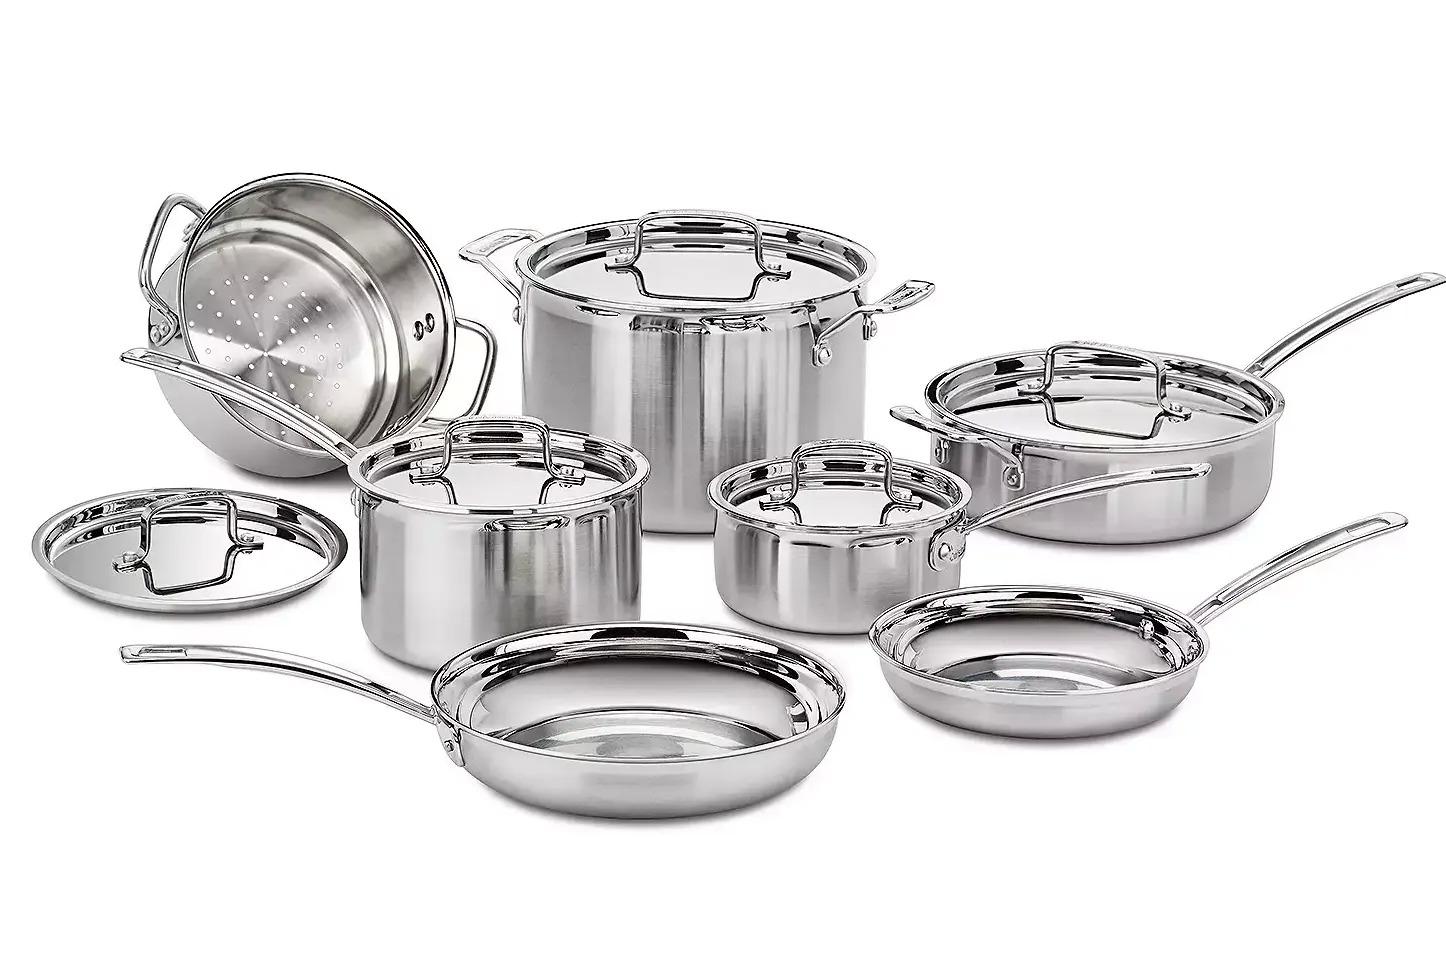 Cuisinart Multiclad Pro Tri-Ply Stainless 12-piece Cookware Set for $168.29 Shipped